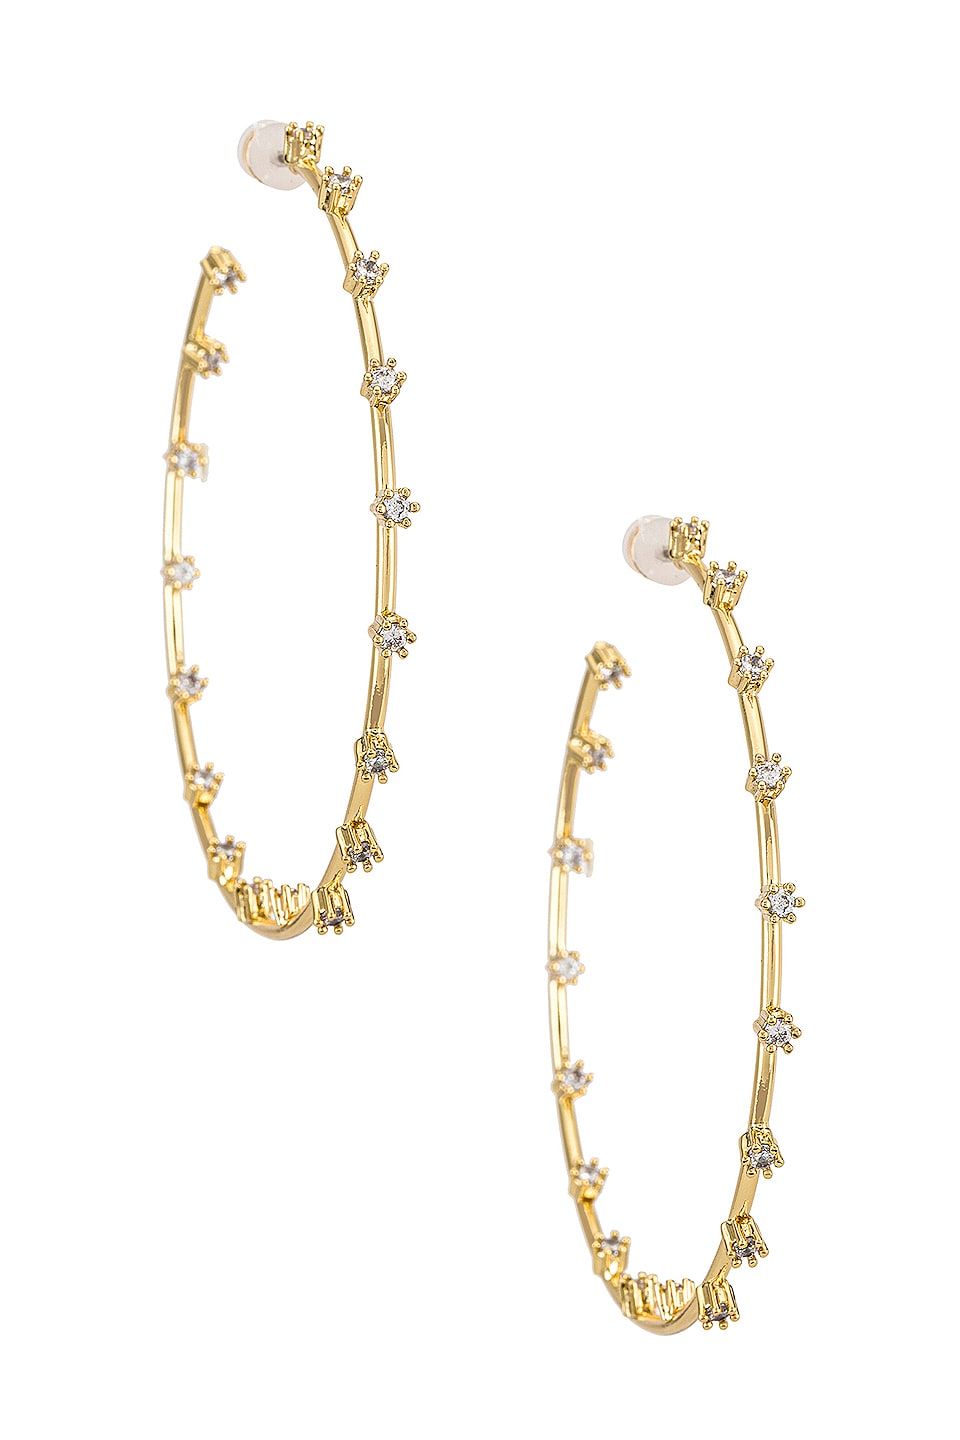 The Stardust Statement Hoops